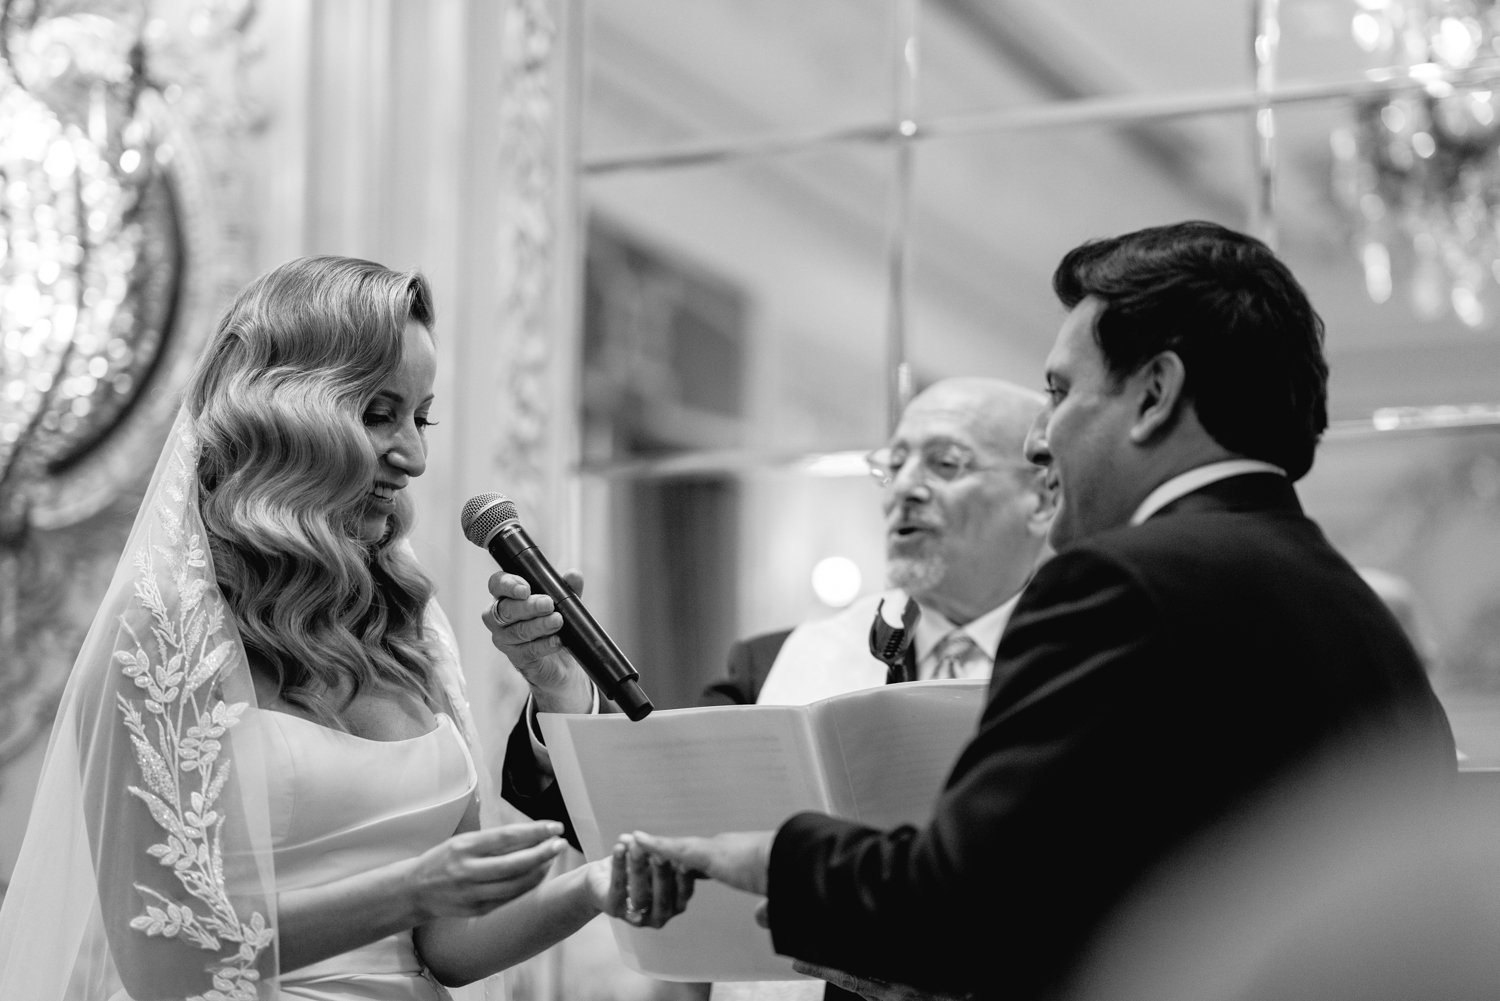 Bride holds the groom's hand and places a wedding ring on his finger. The officiant is behind them, holding a microphone up to the bride. They are all smiling. 

Manhattan Luxury Wedding. New York Luxury Wedding Photographer. Wedding in Manhattan. NYC Luxury Wedding.